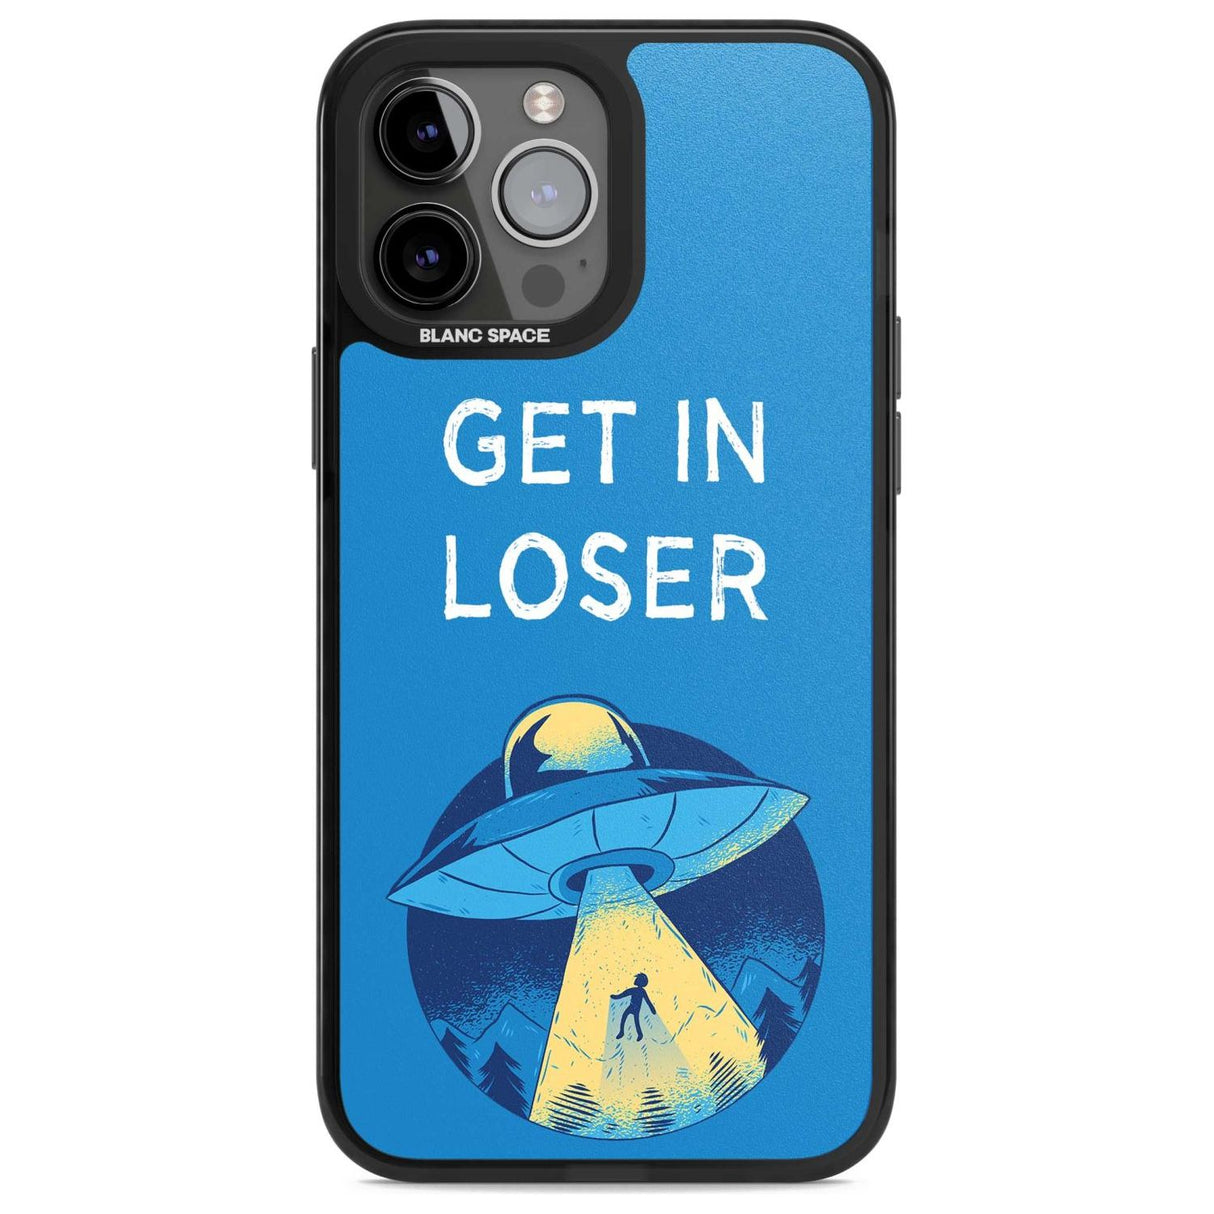 Get in Loser UFO Phone Case iPhone 13 Pro Max / Magsafe Black Impact Case Blanc Space